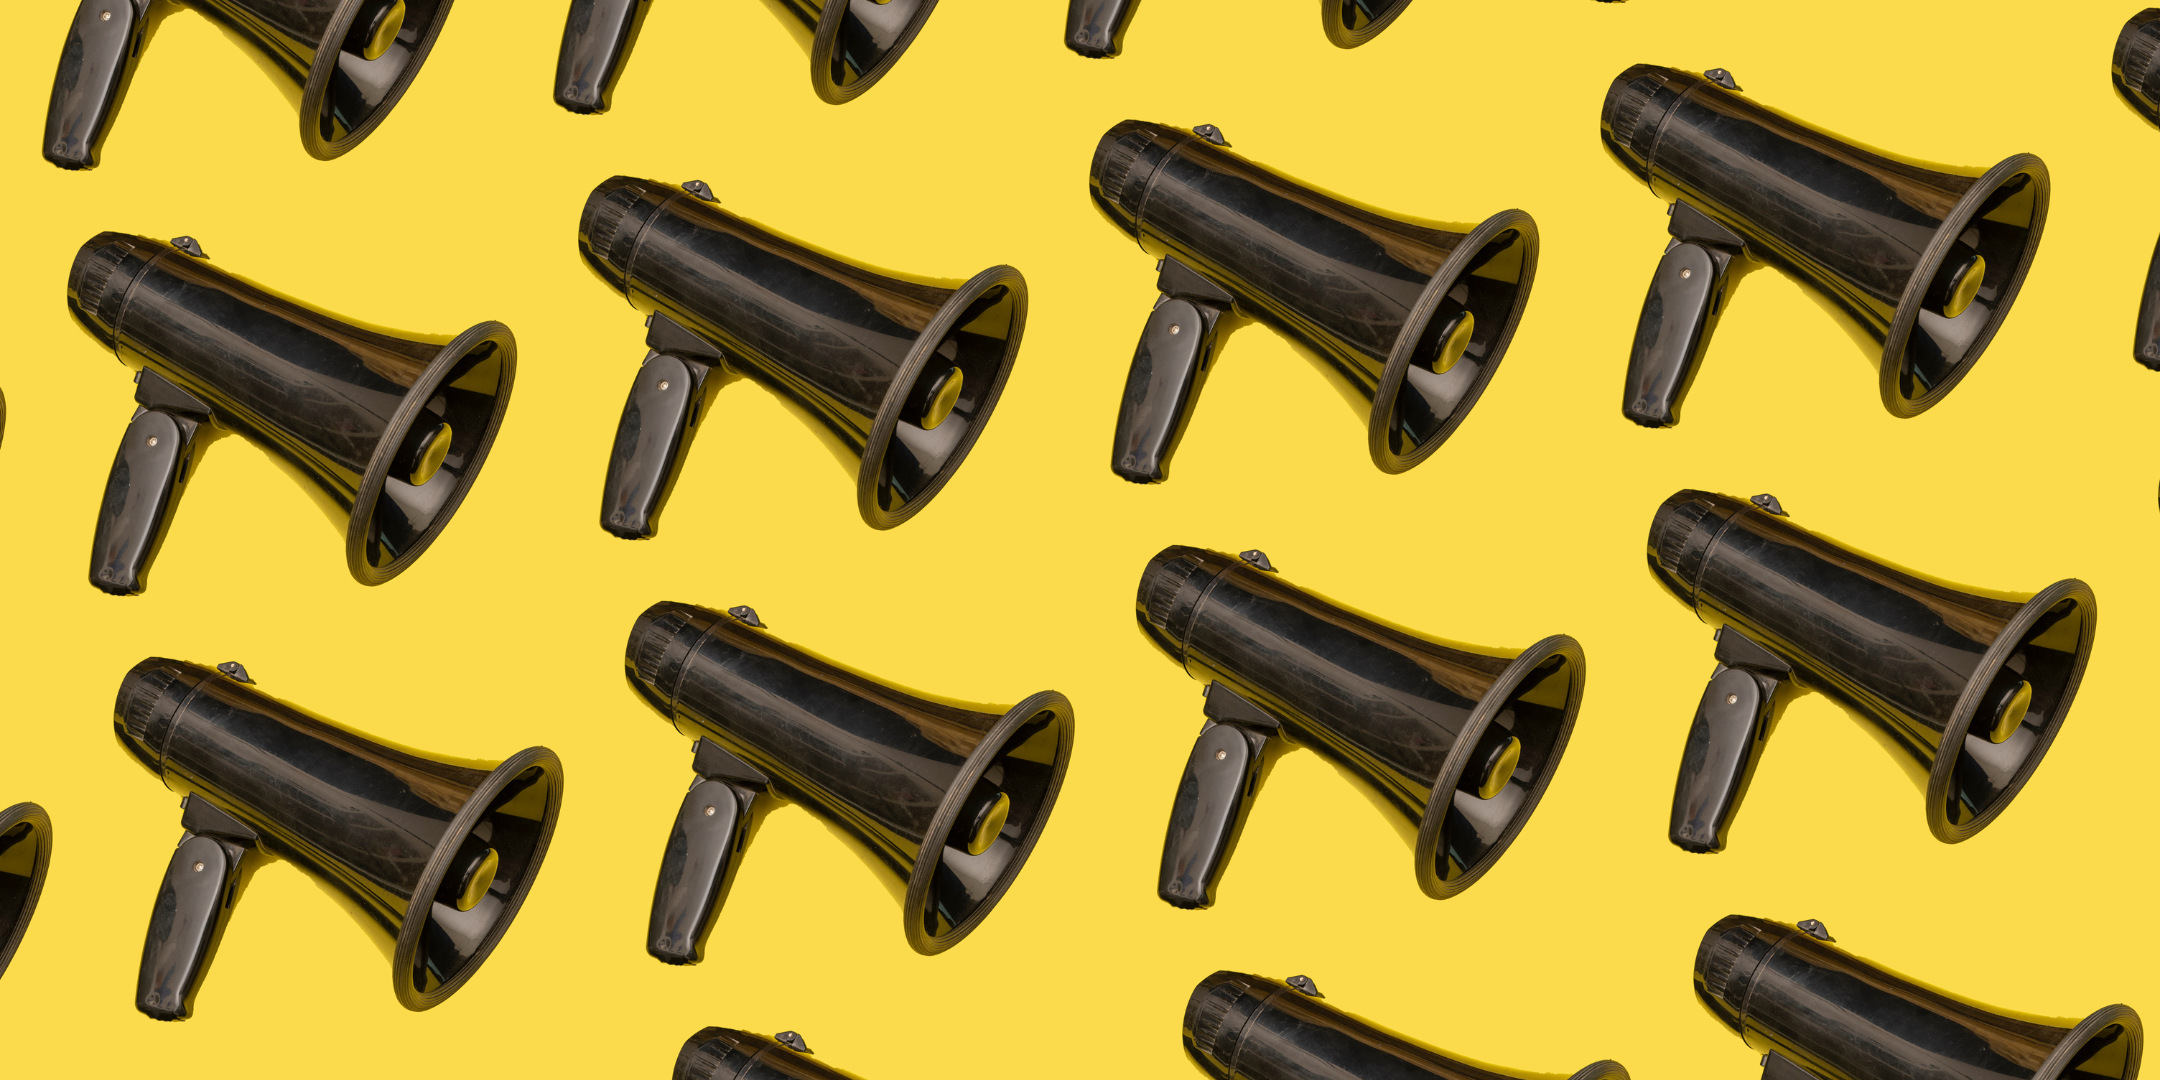 A pattern of black megaphones on a yellow background.